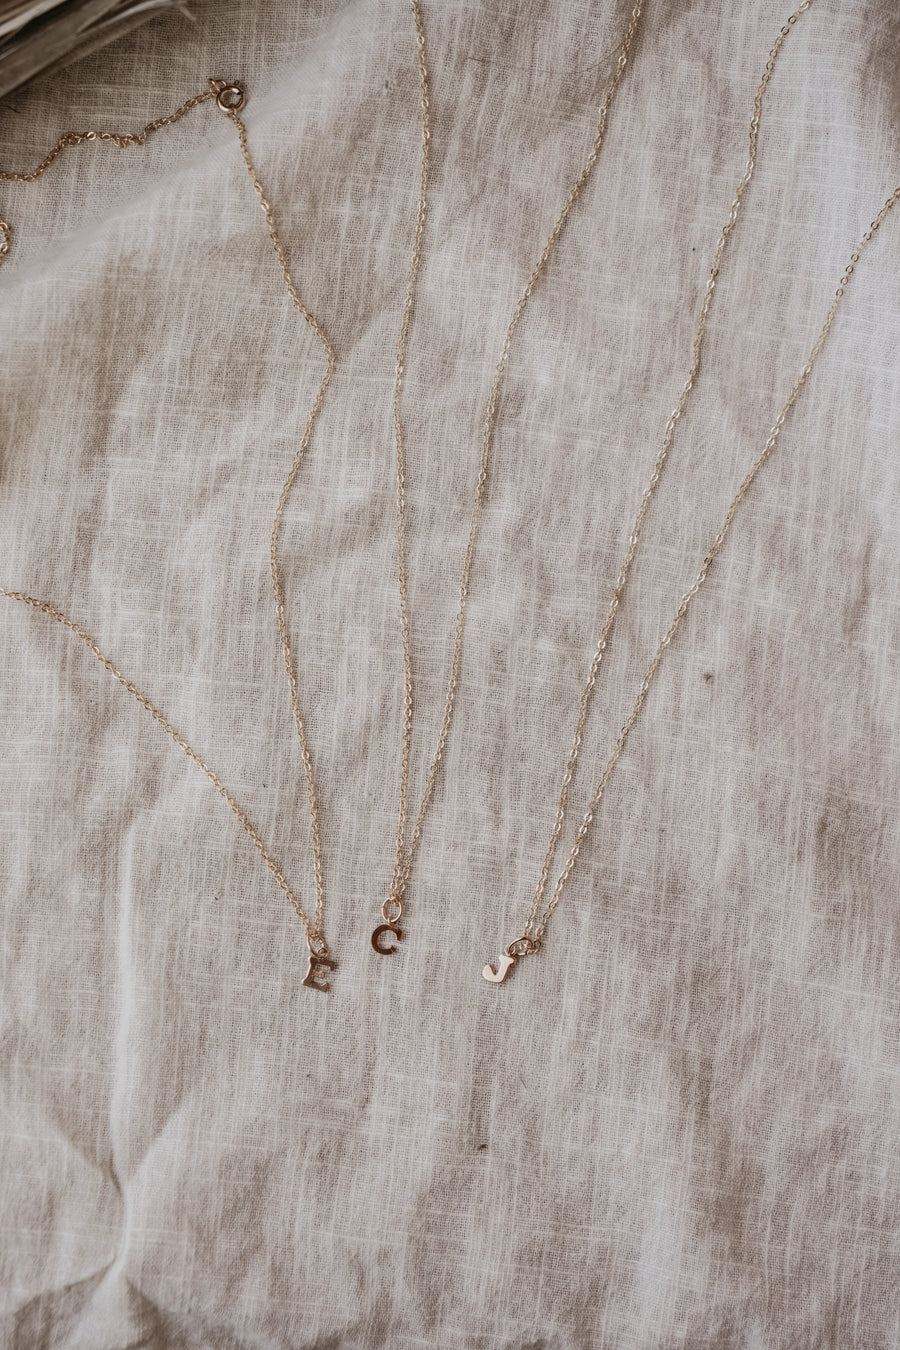 Love Letter Necklaces in 14k Gold-Fill